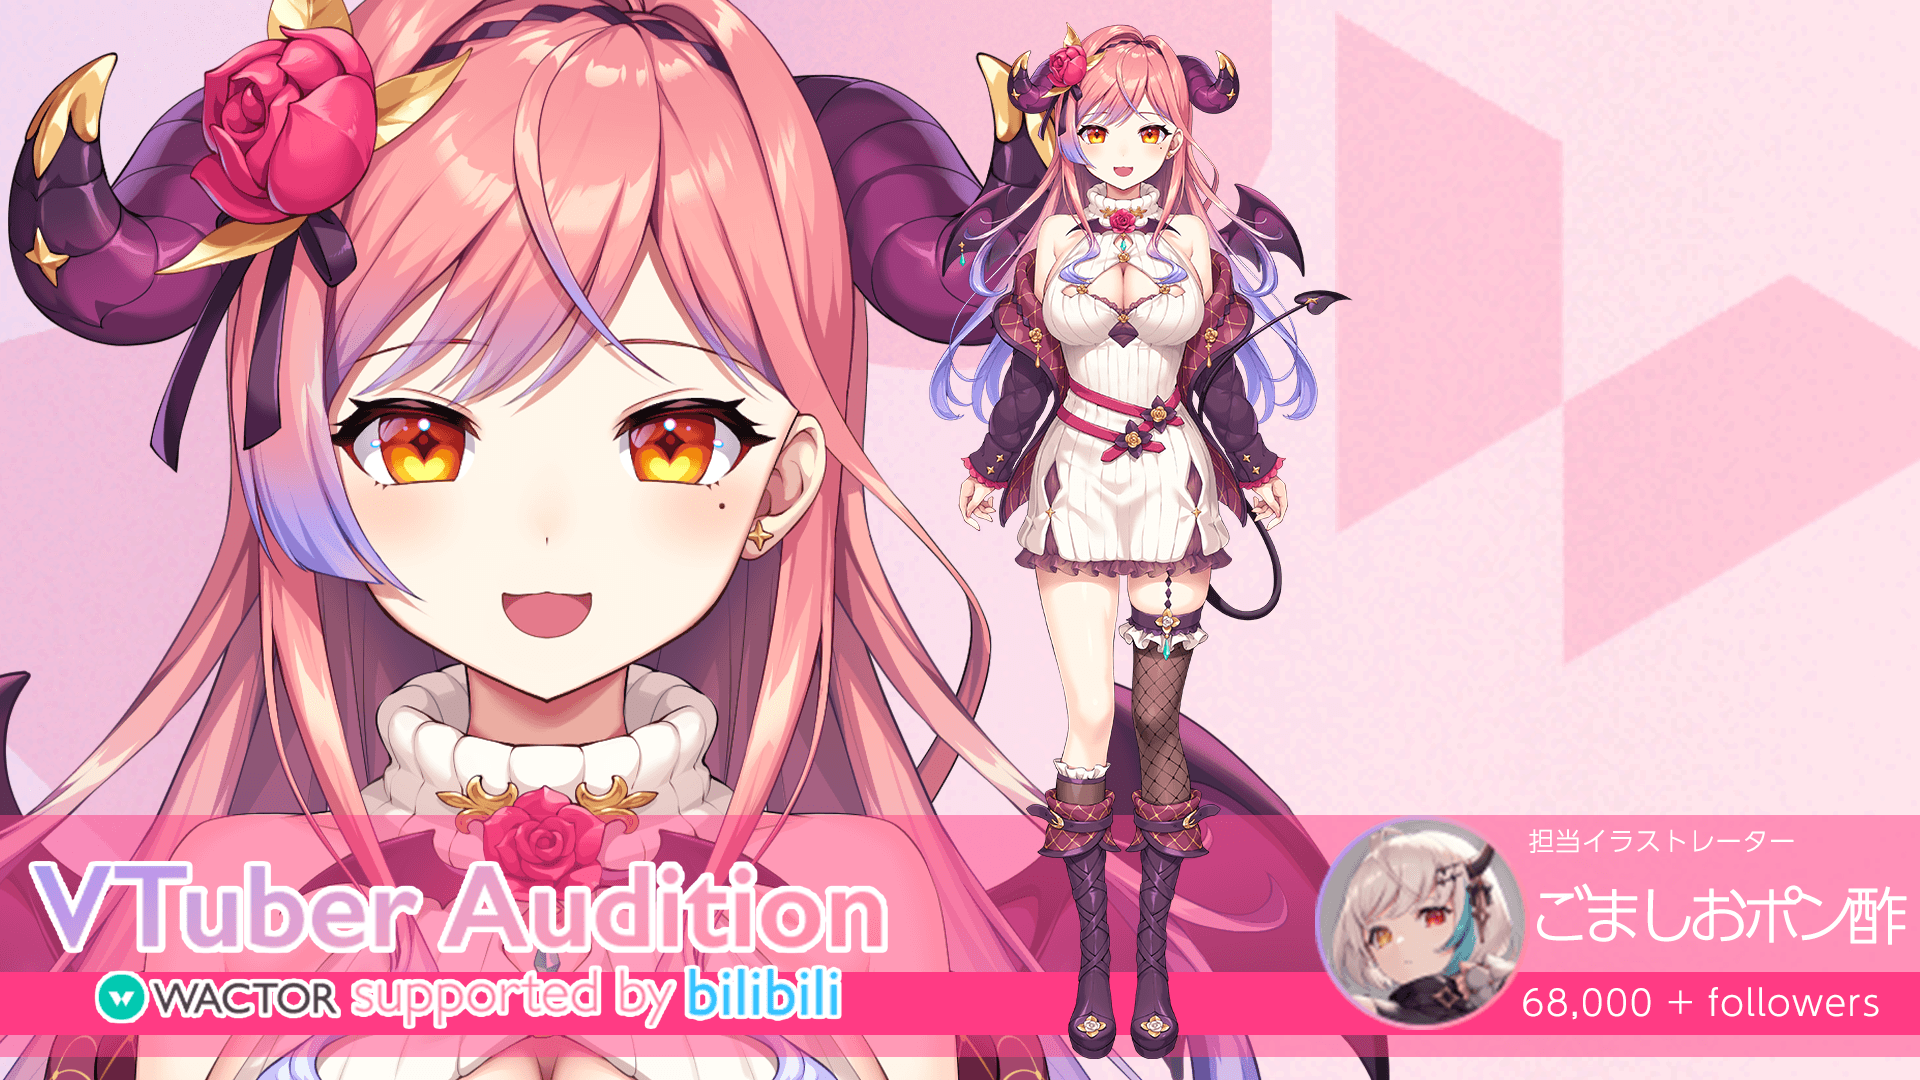 wactor-vtuber-audition-supported-by-bilibili-4